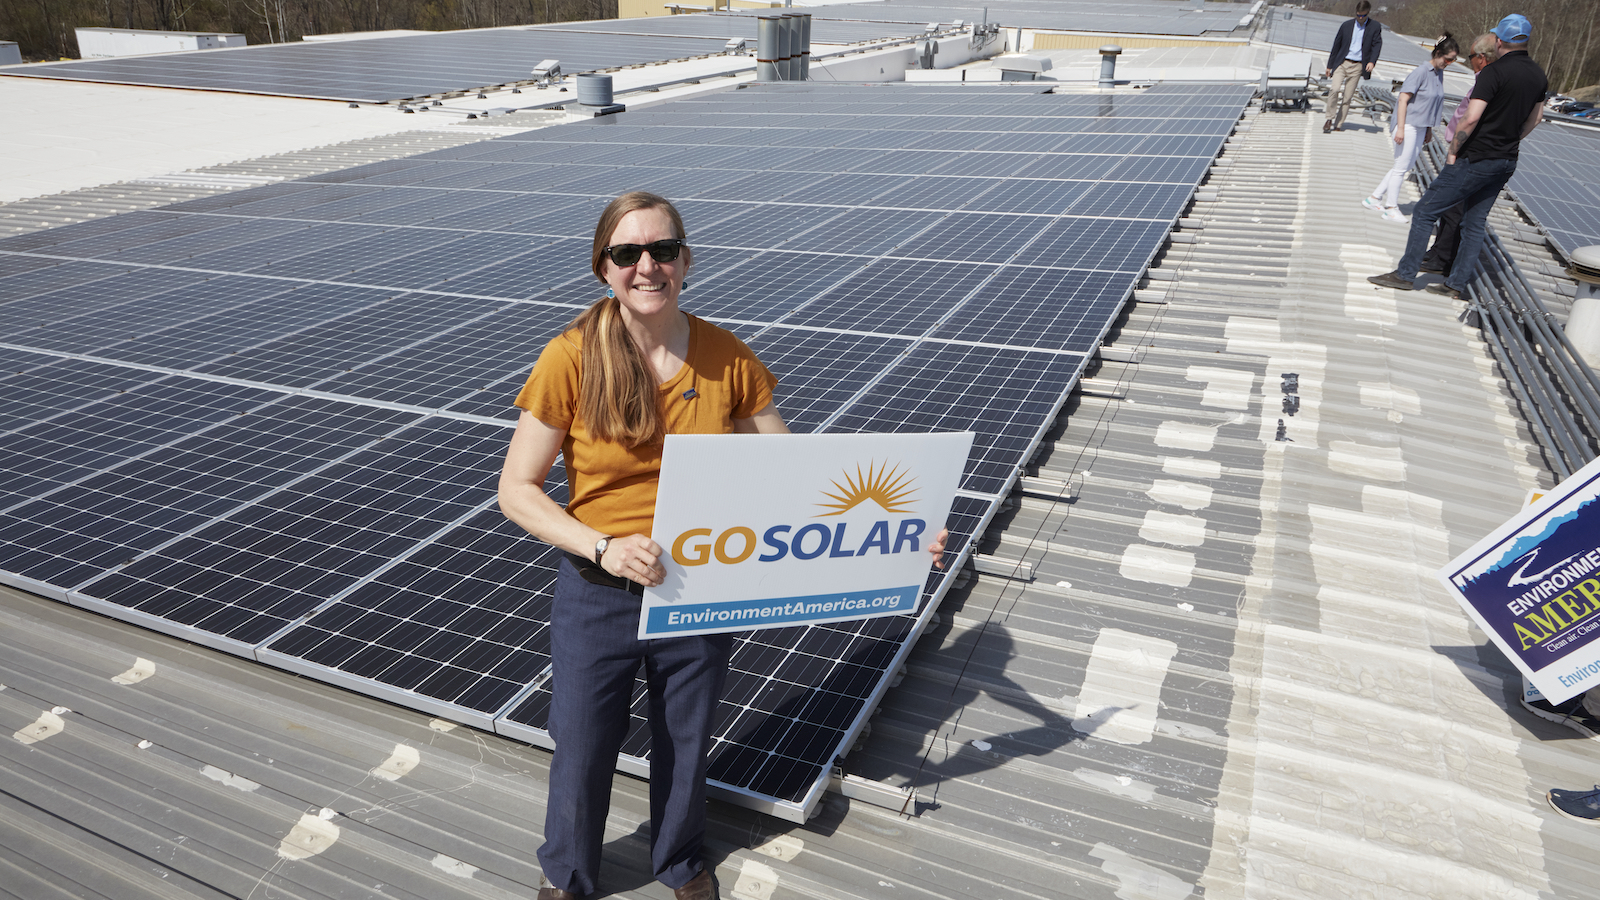 Environment America 100% Renewable Energy Senior Director Johanna Neumann stands on a warehouse rooftop covered in solar panels holding a sign that reads 